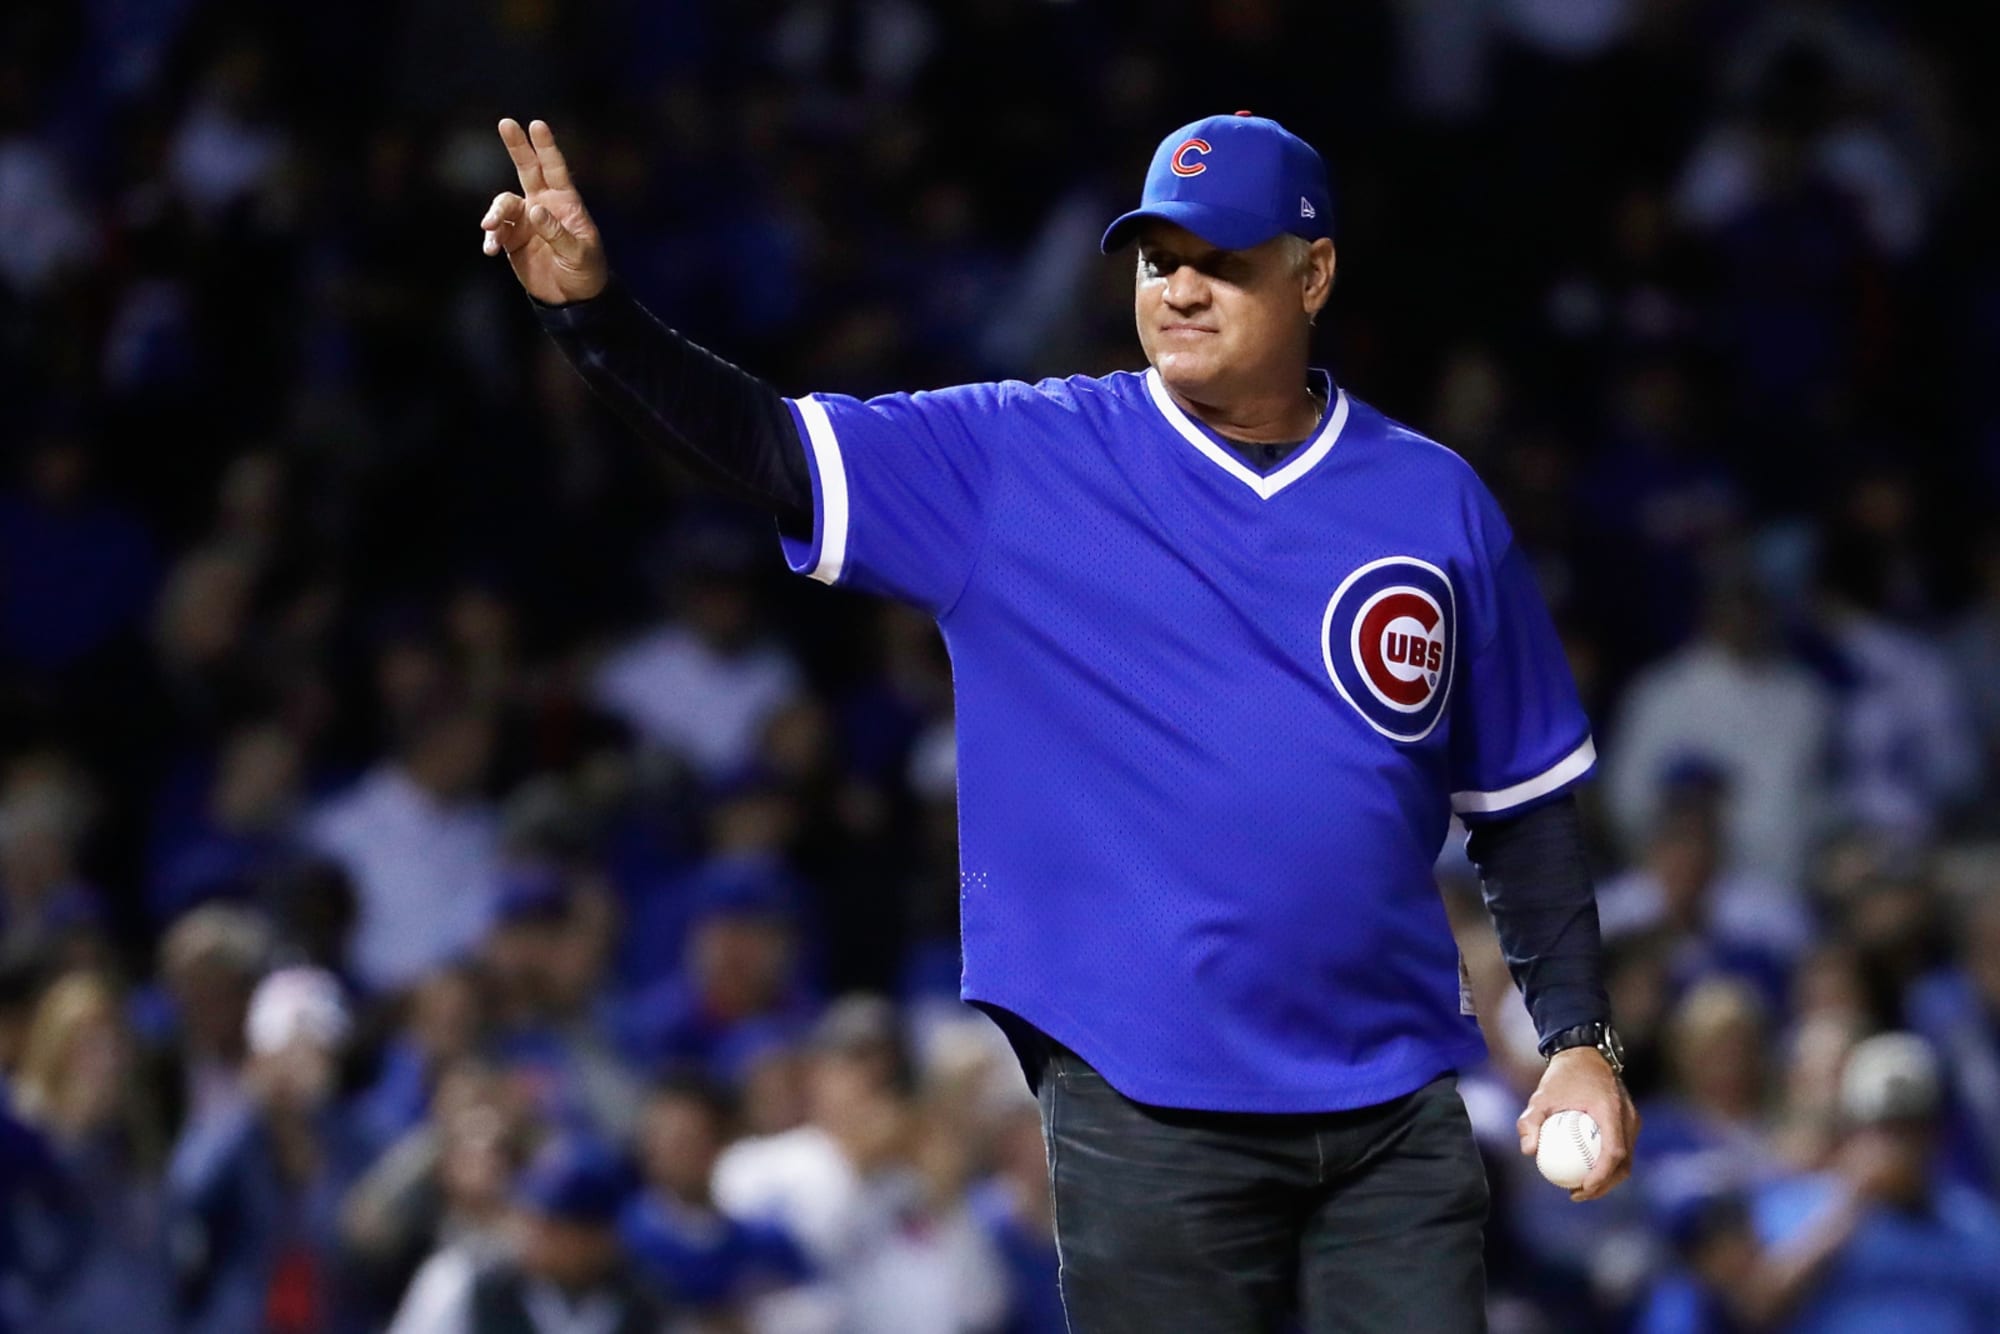 Cubs Ryne Sandberg is new to this baseball being put on hold thing photo pic